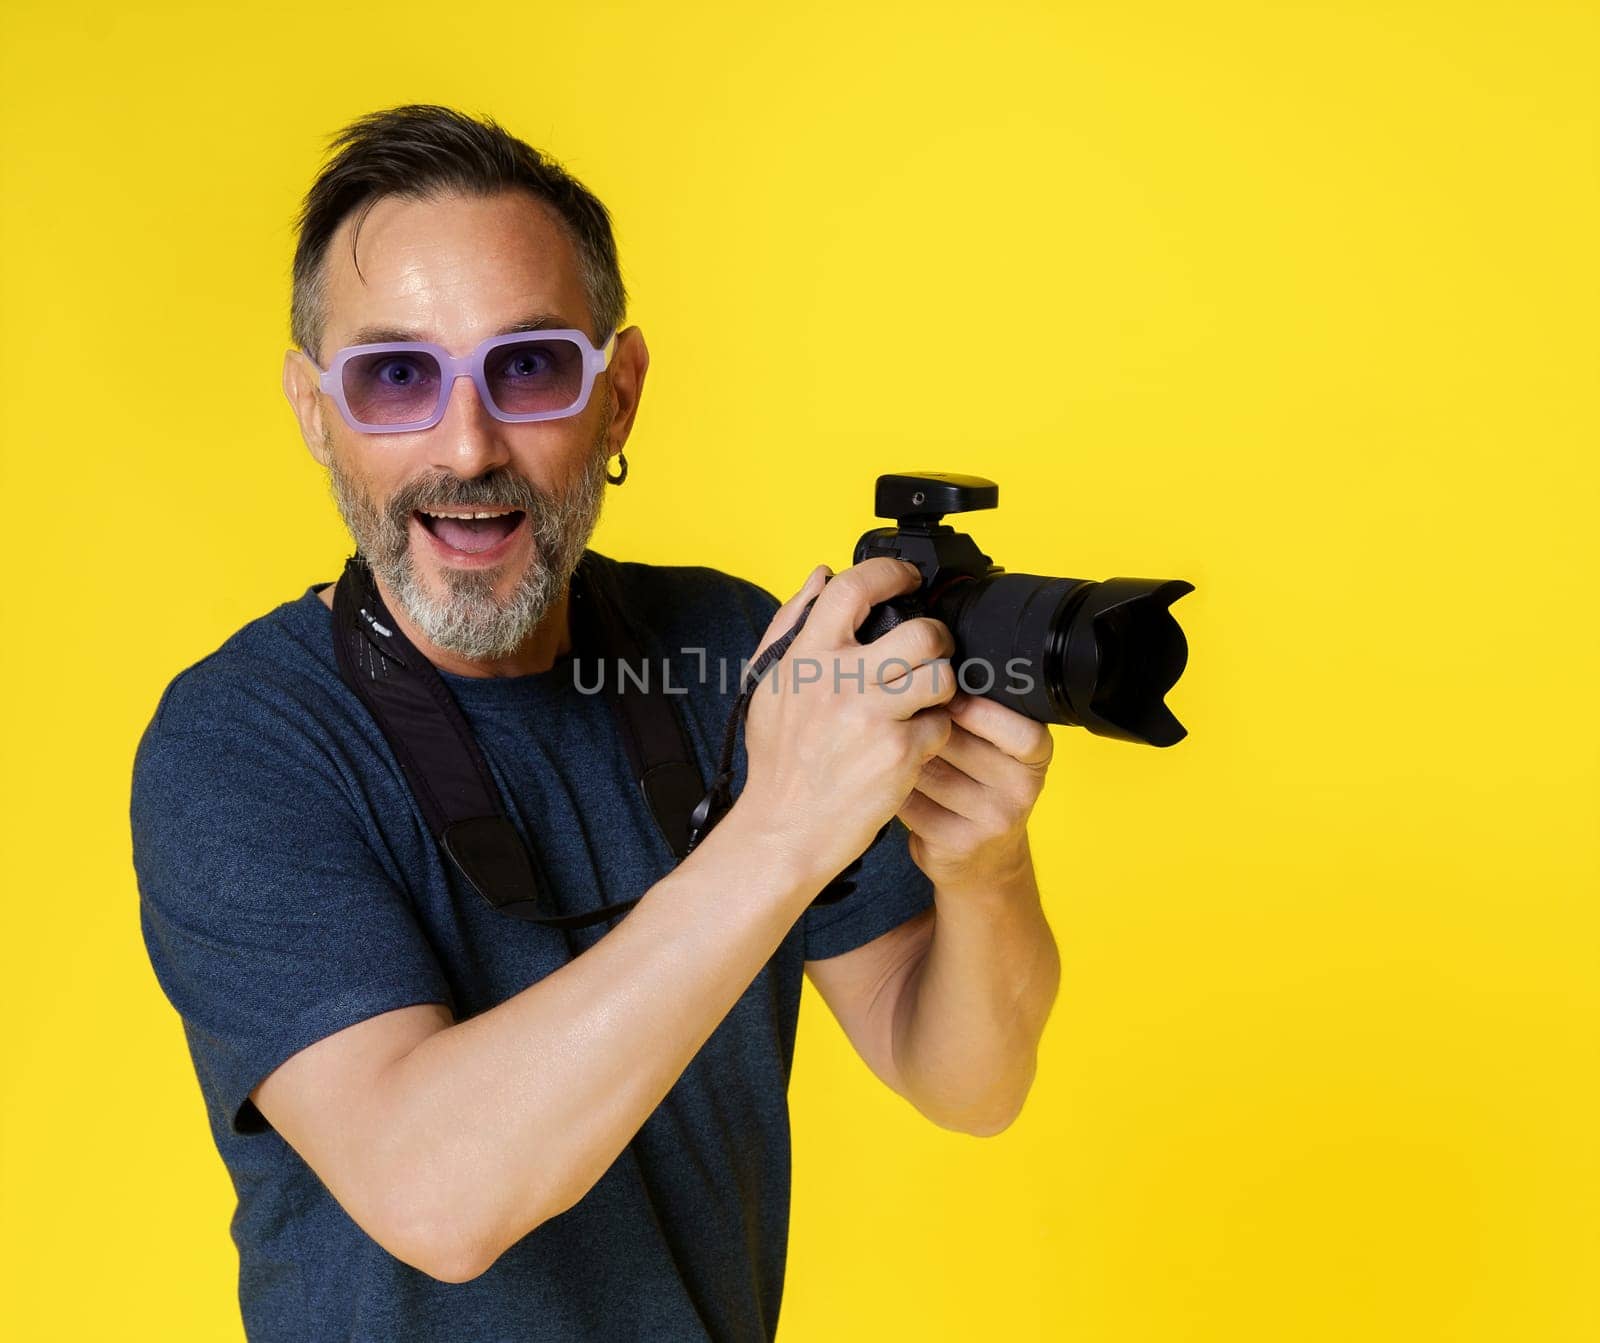 Smiling and happy mid-aged man, passionate about photography, isolated on yellow background, holding digital photo camera. Joy and contentment of mid-aged individual indulging in photography hobby. High quality photo